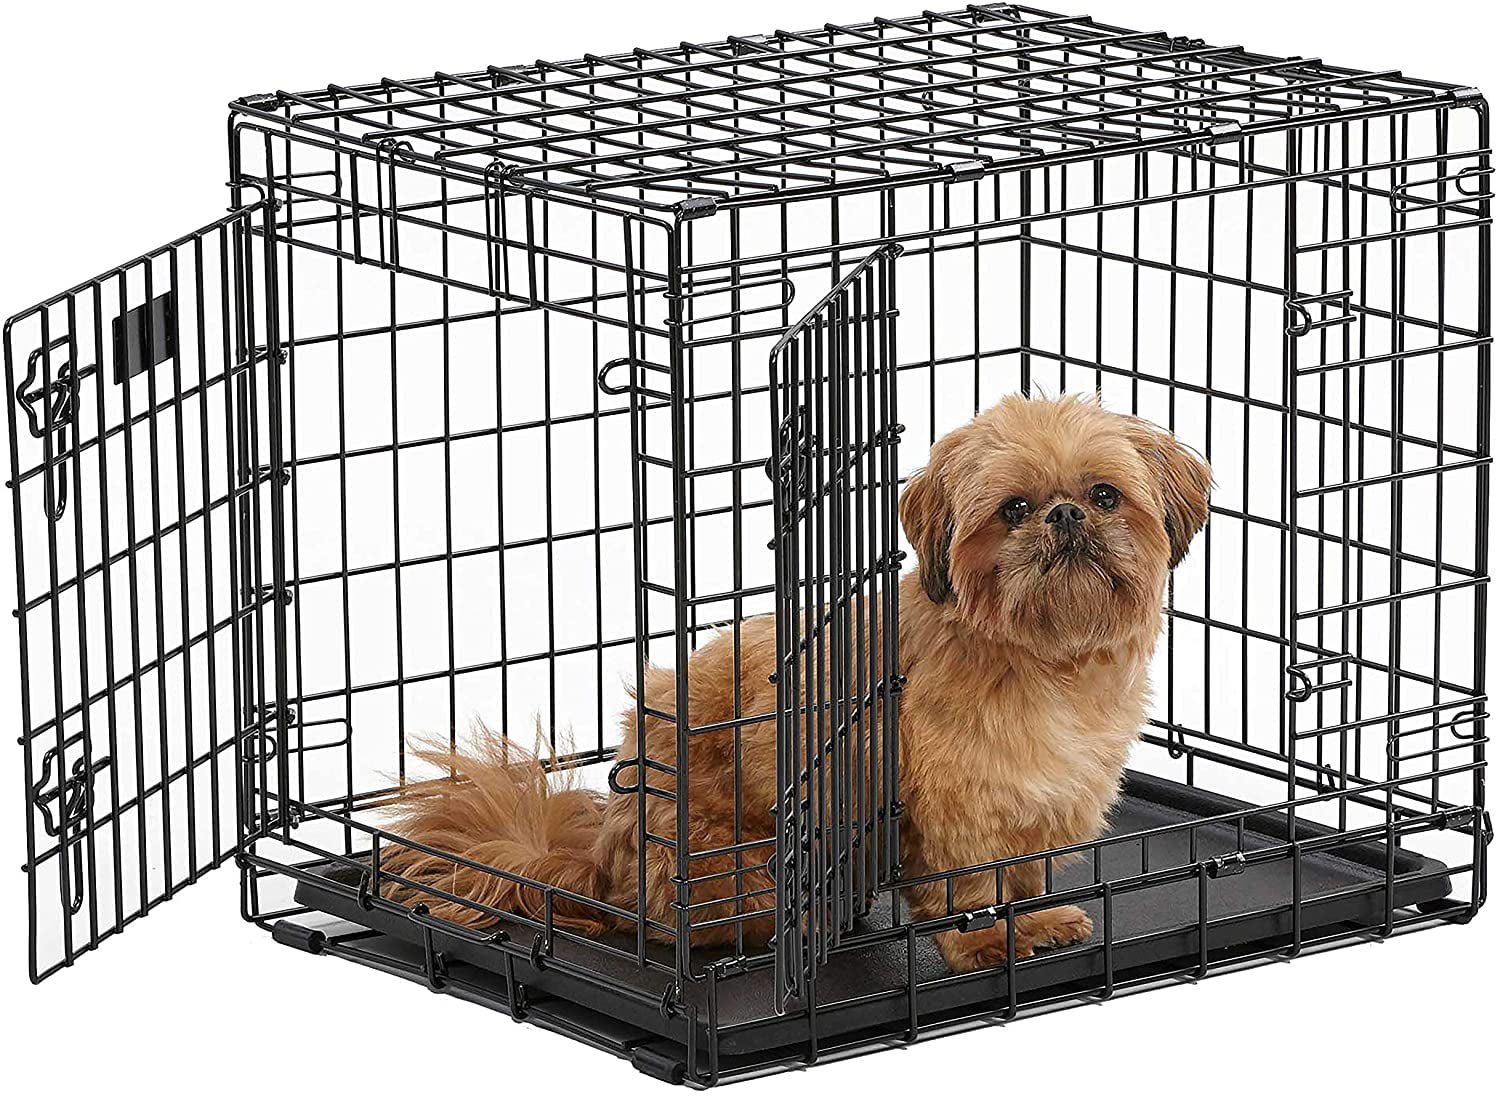 Everila Dog Crate Replacement Divider Panel to Fit Midwest 42Lx28W Metal Dog Crates 